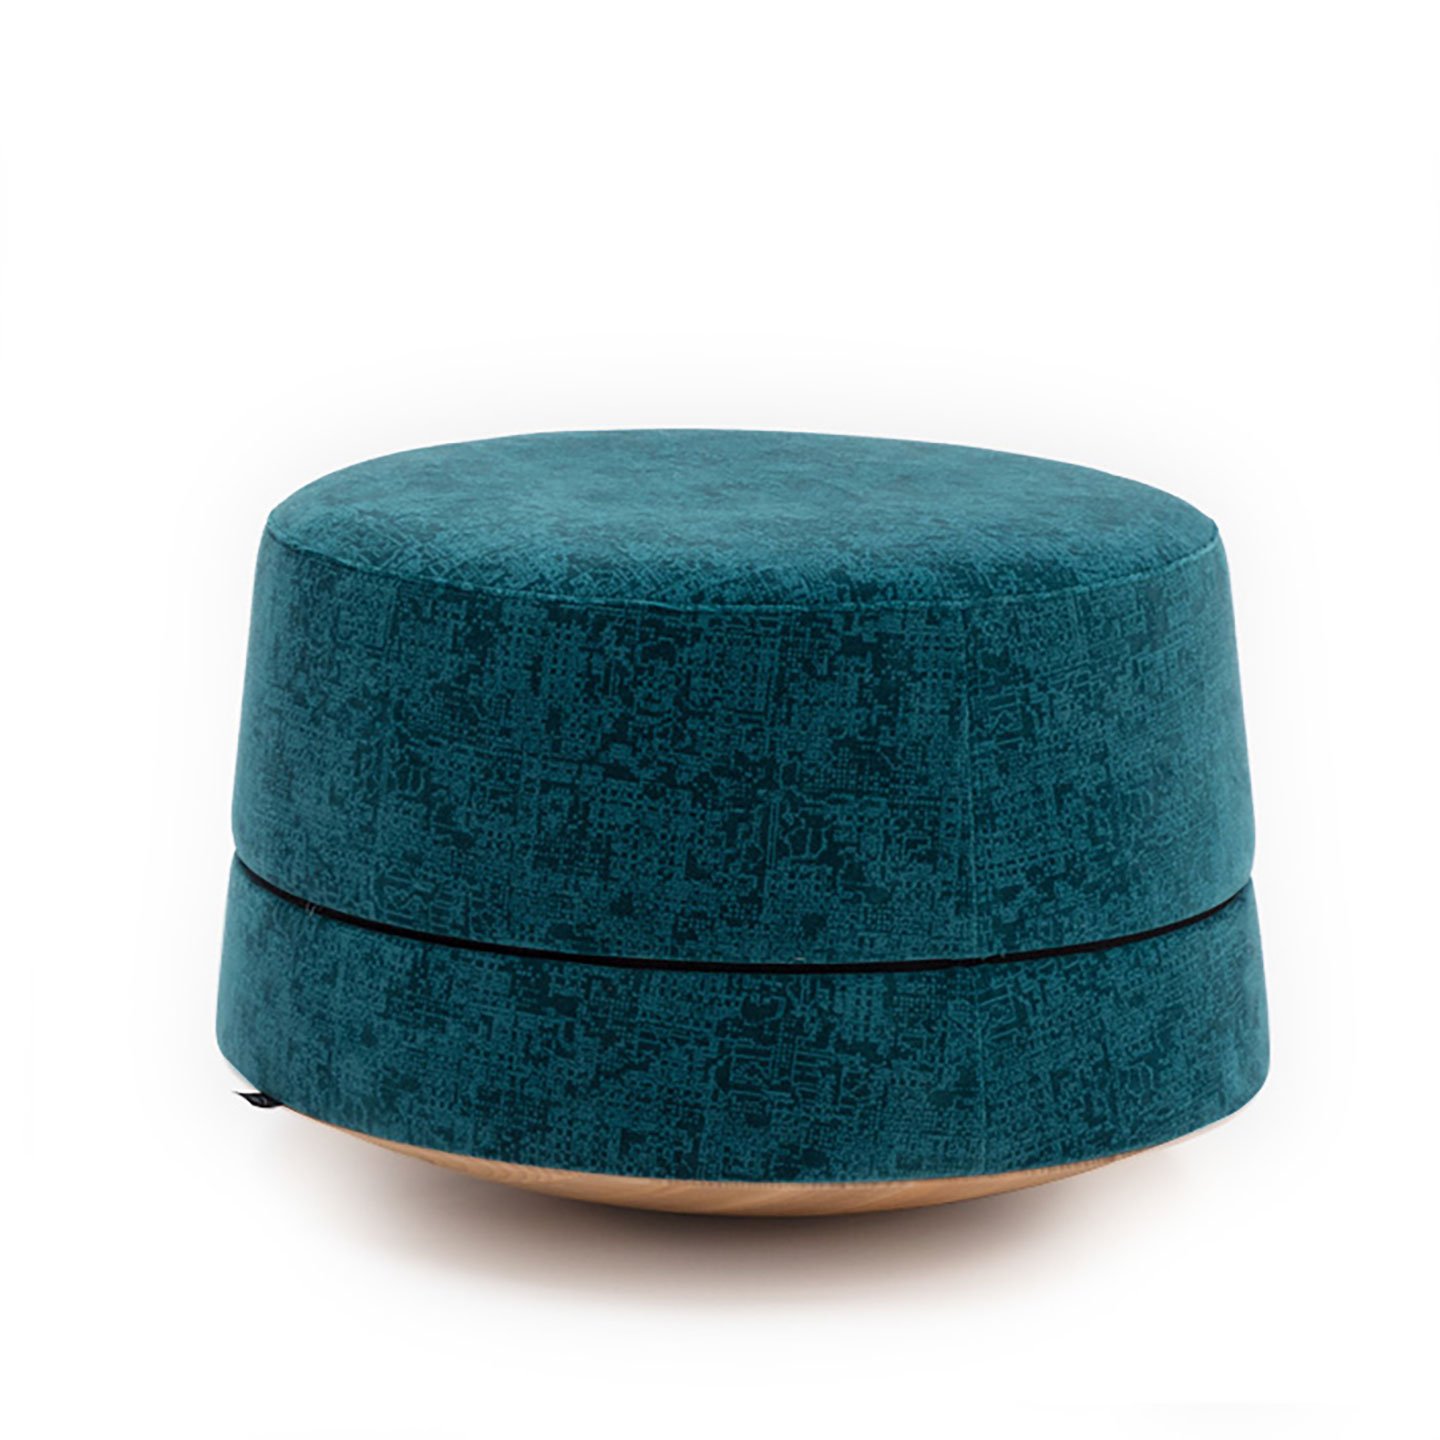 Haworth Buzzibalance pouf in teal color with acoustic absorbers and movement activators